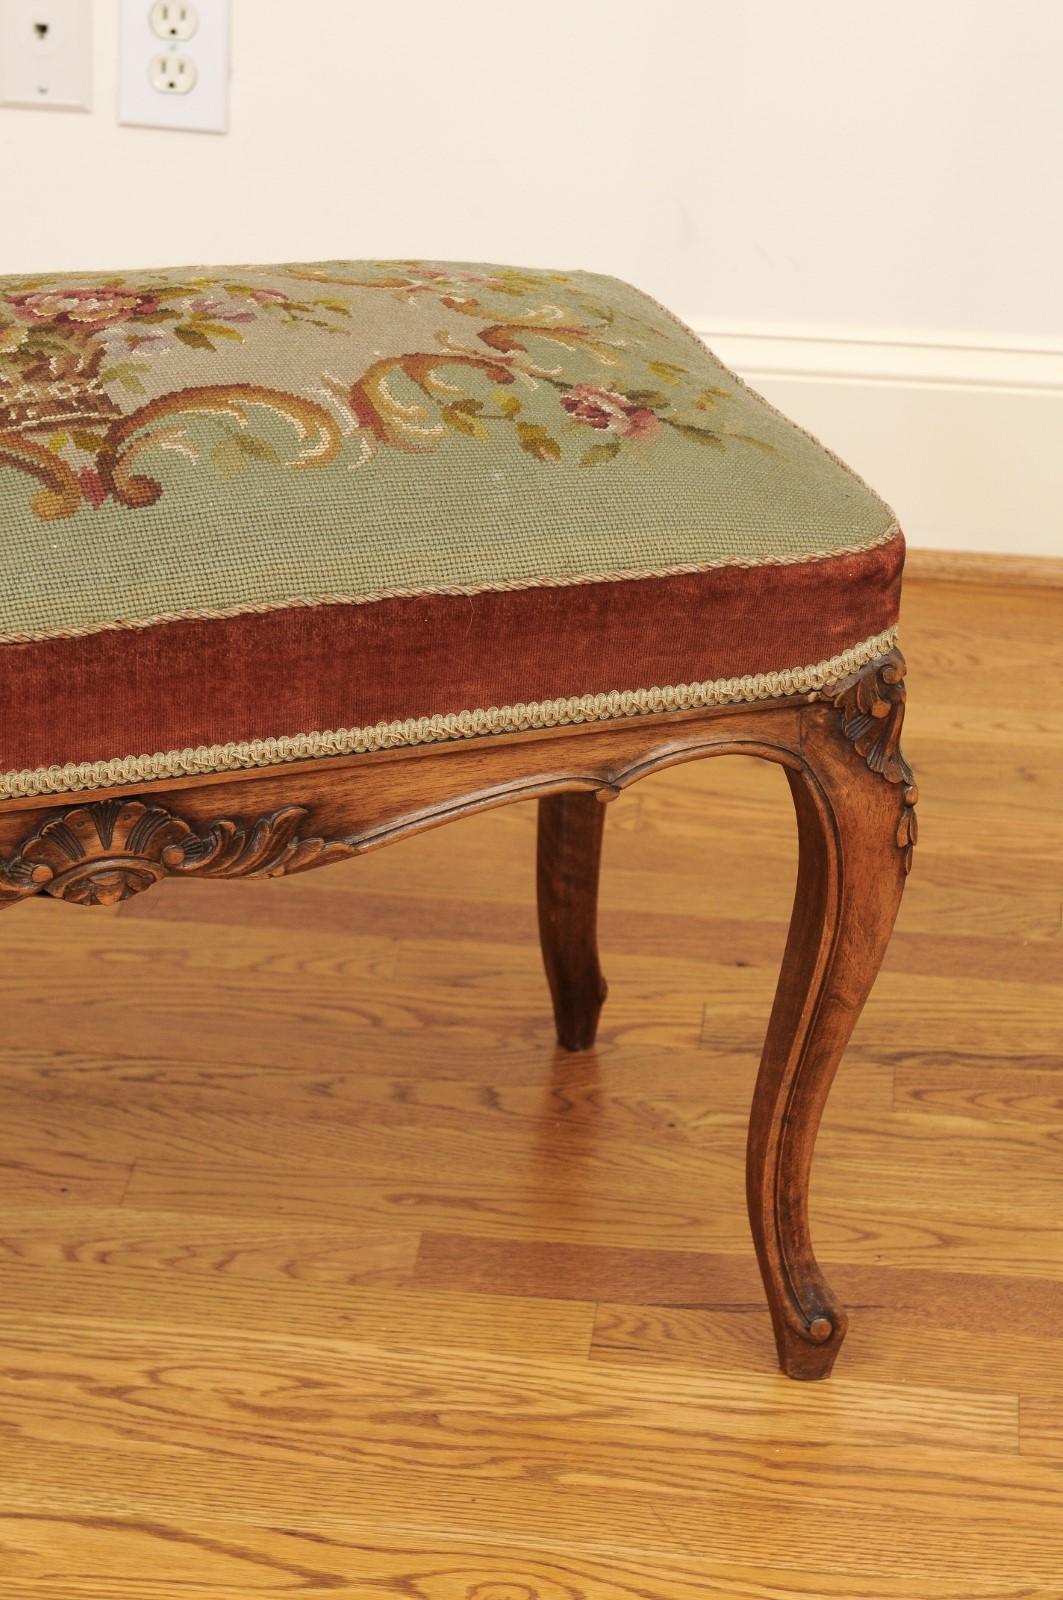 19th Century French Napoléon III 1860s Walnut Banquette with Original Needlepoint Tapestry